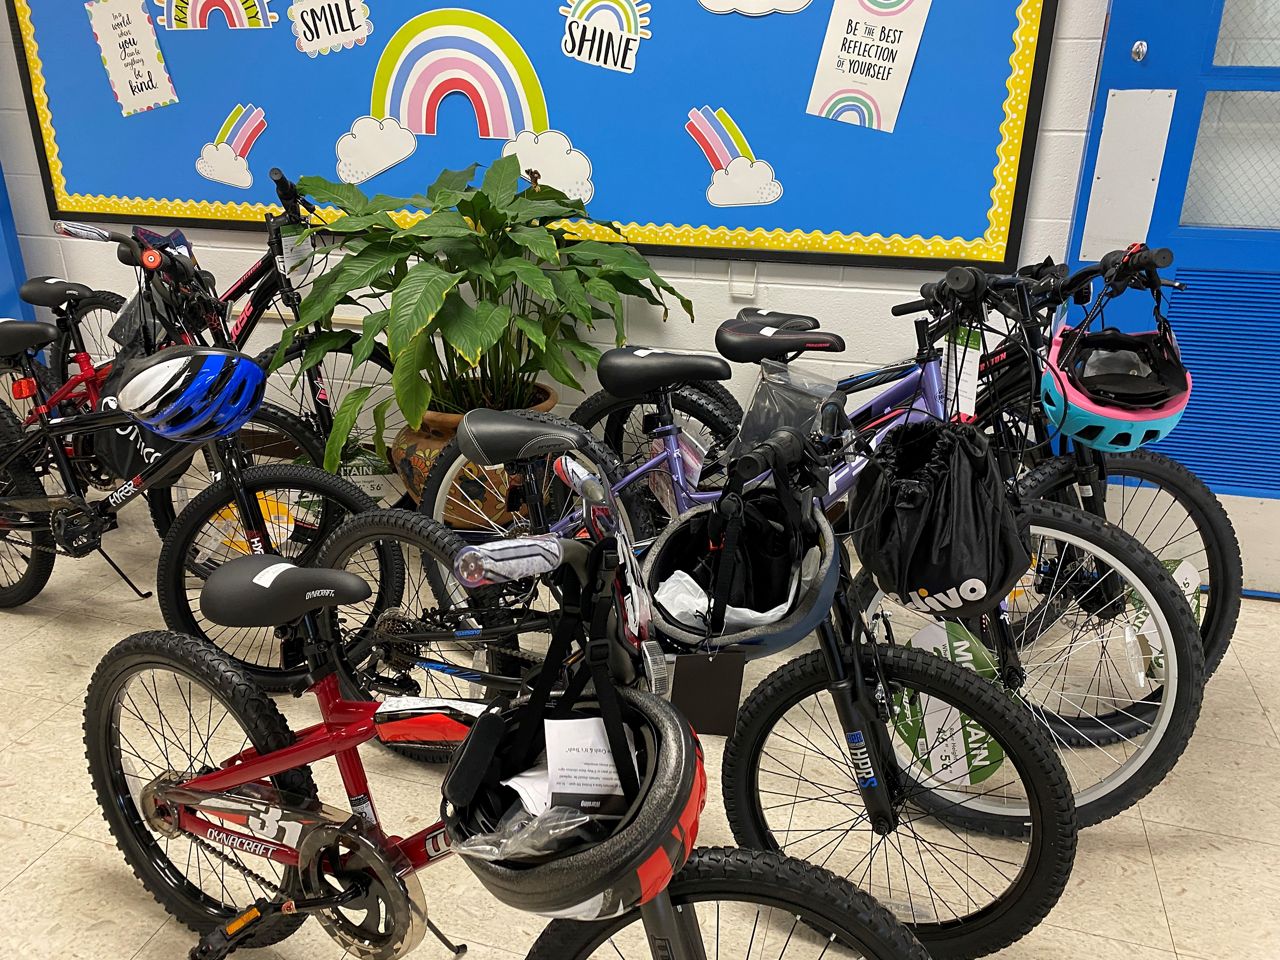 Every participant received a t-shirt, toys and a certificate. The names of eleven student were randomly selected to win a new bike. (Spectrum News 1/Ashley N. Brown)